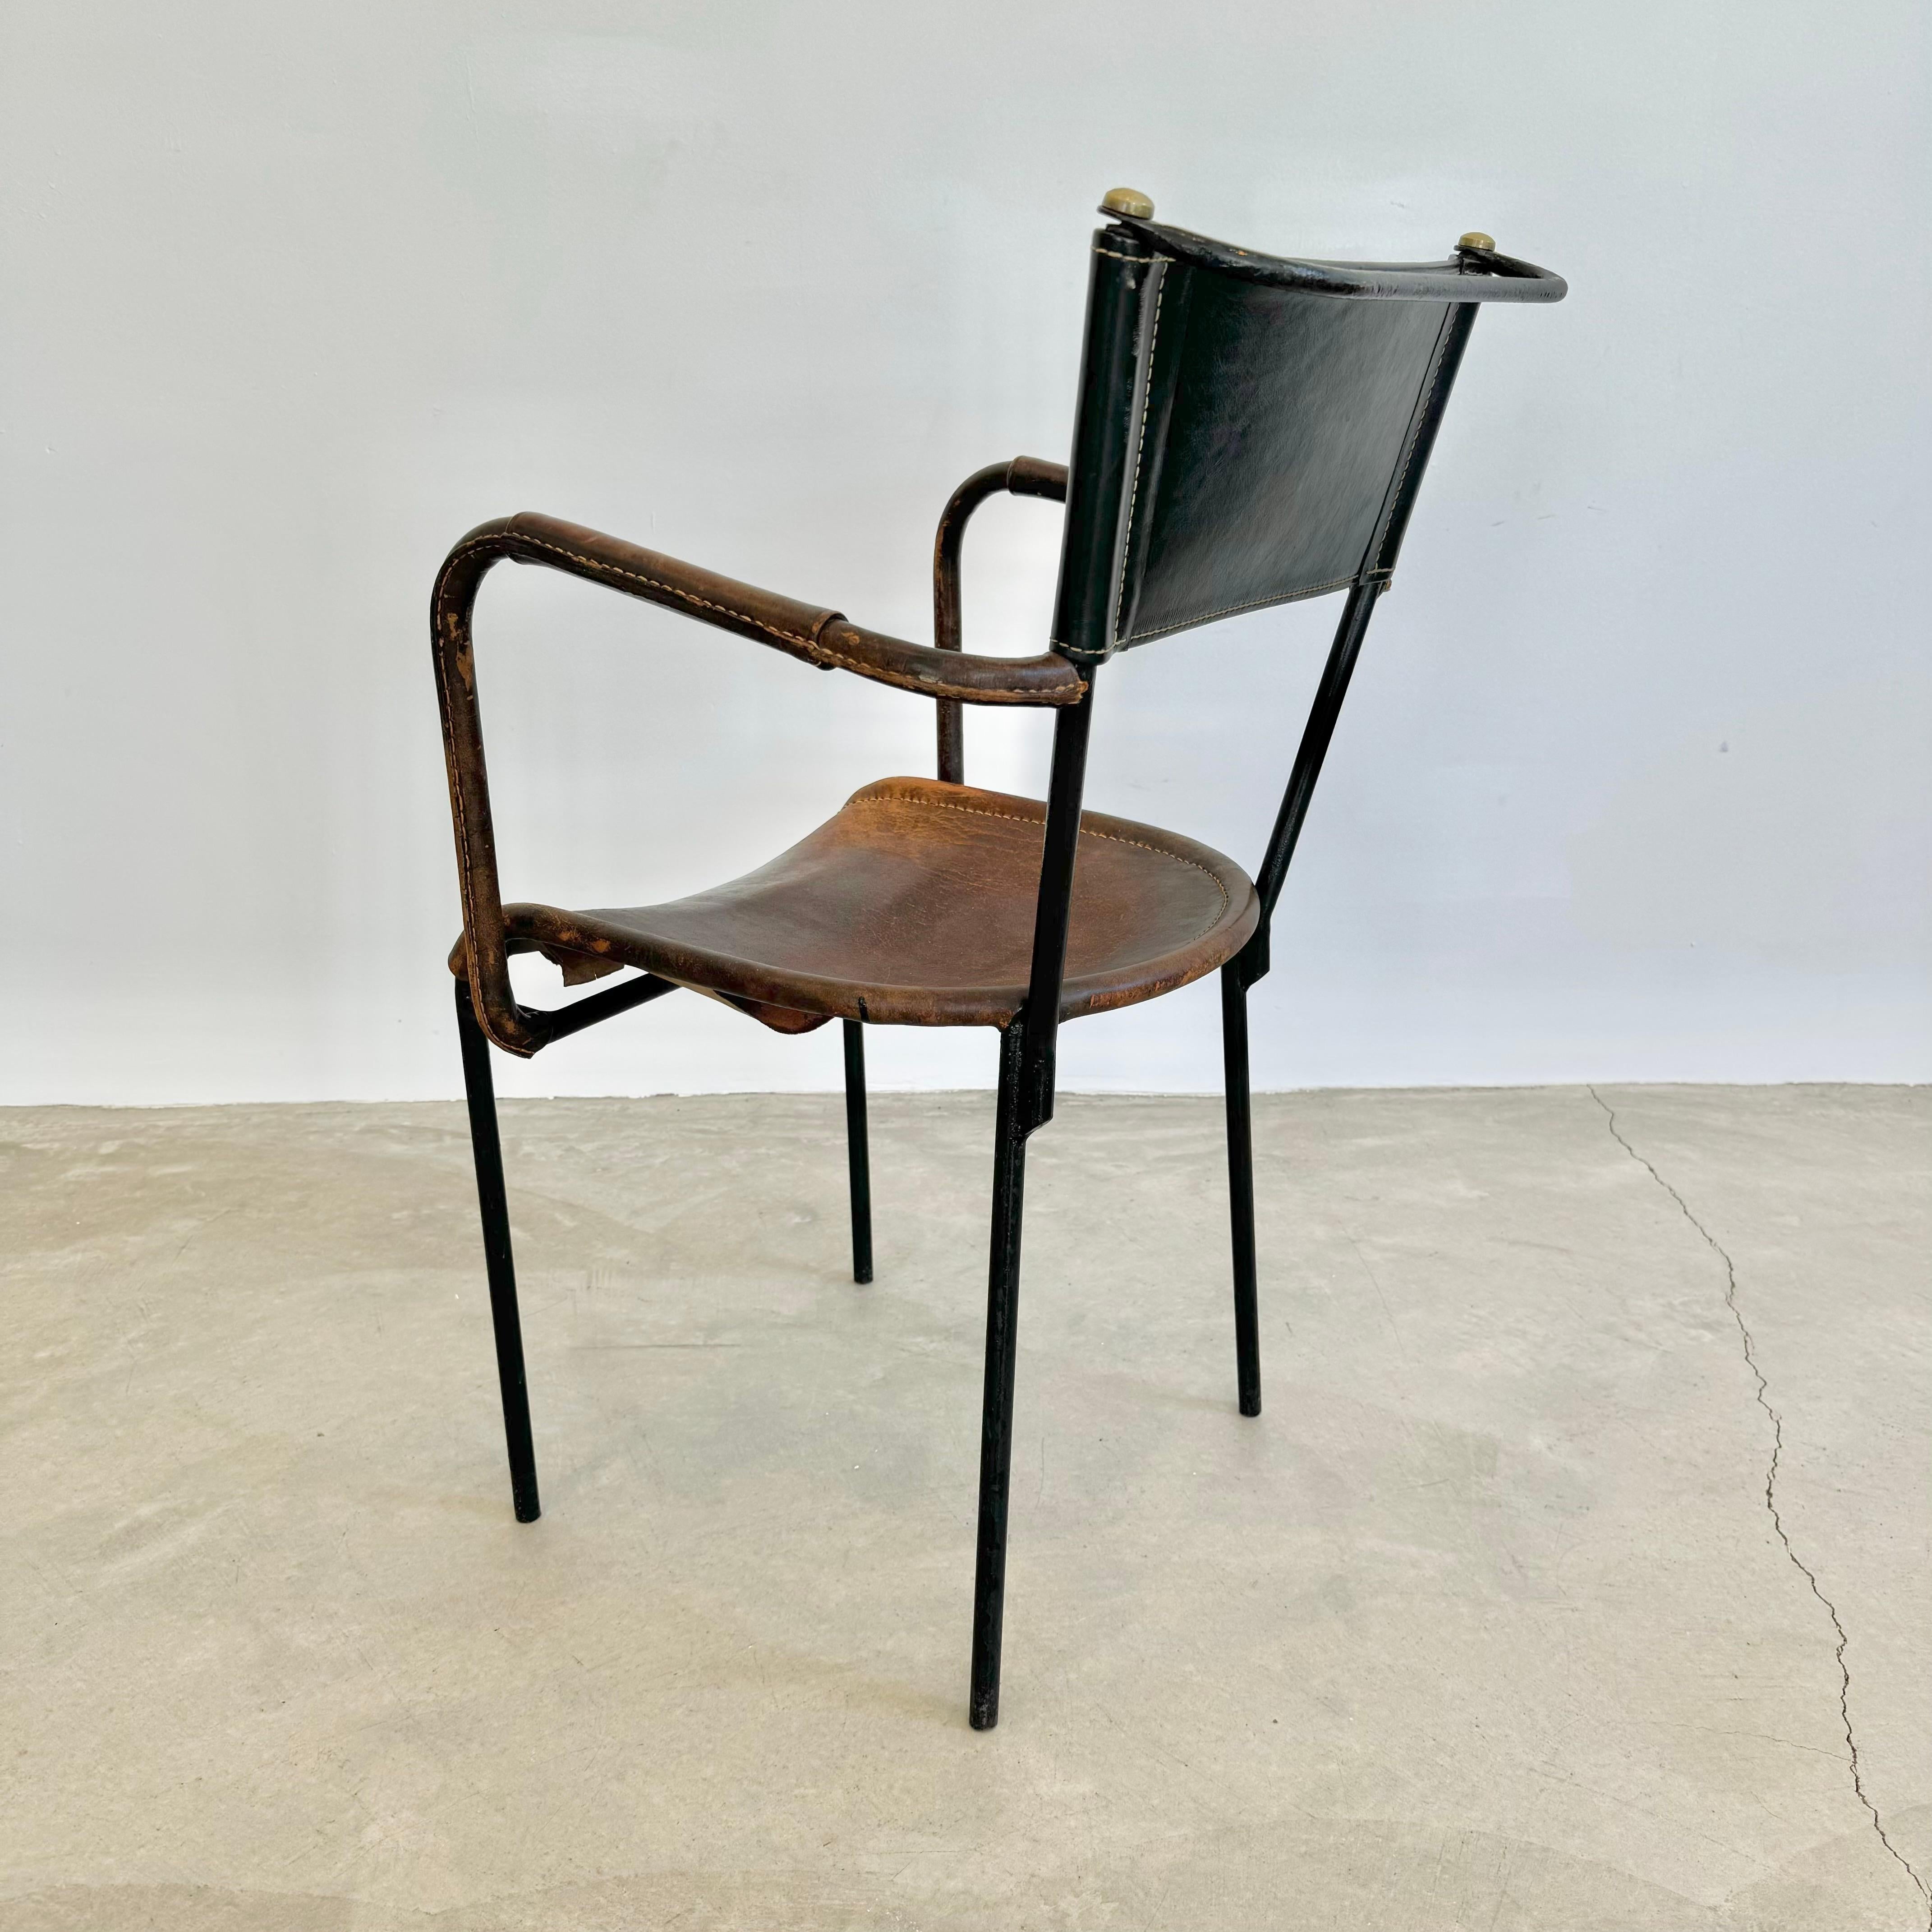 Jacques Adnet Sculptural Leather Armchair, 1950s France For Sale 6